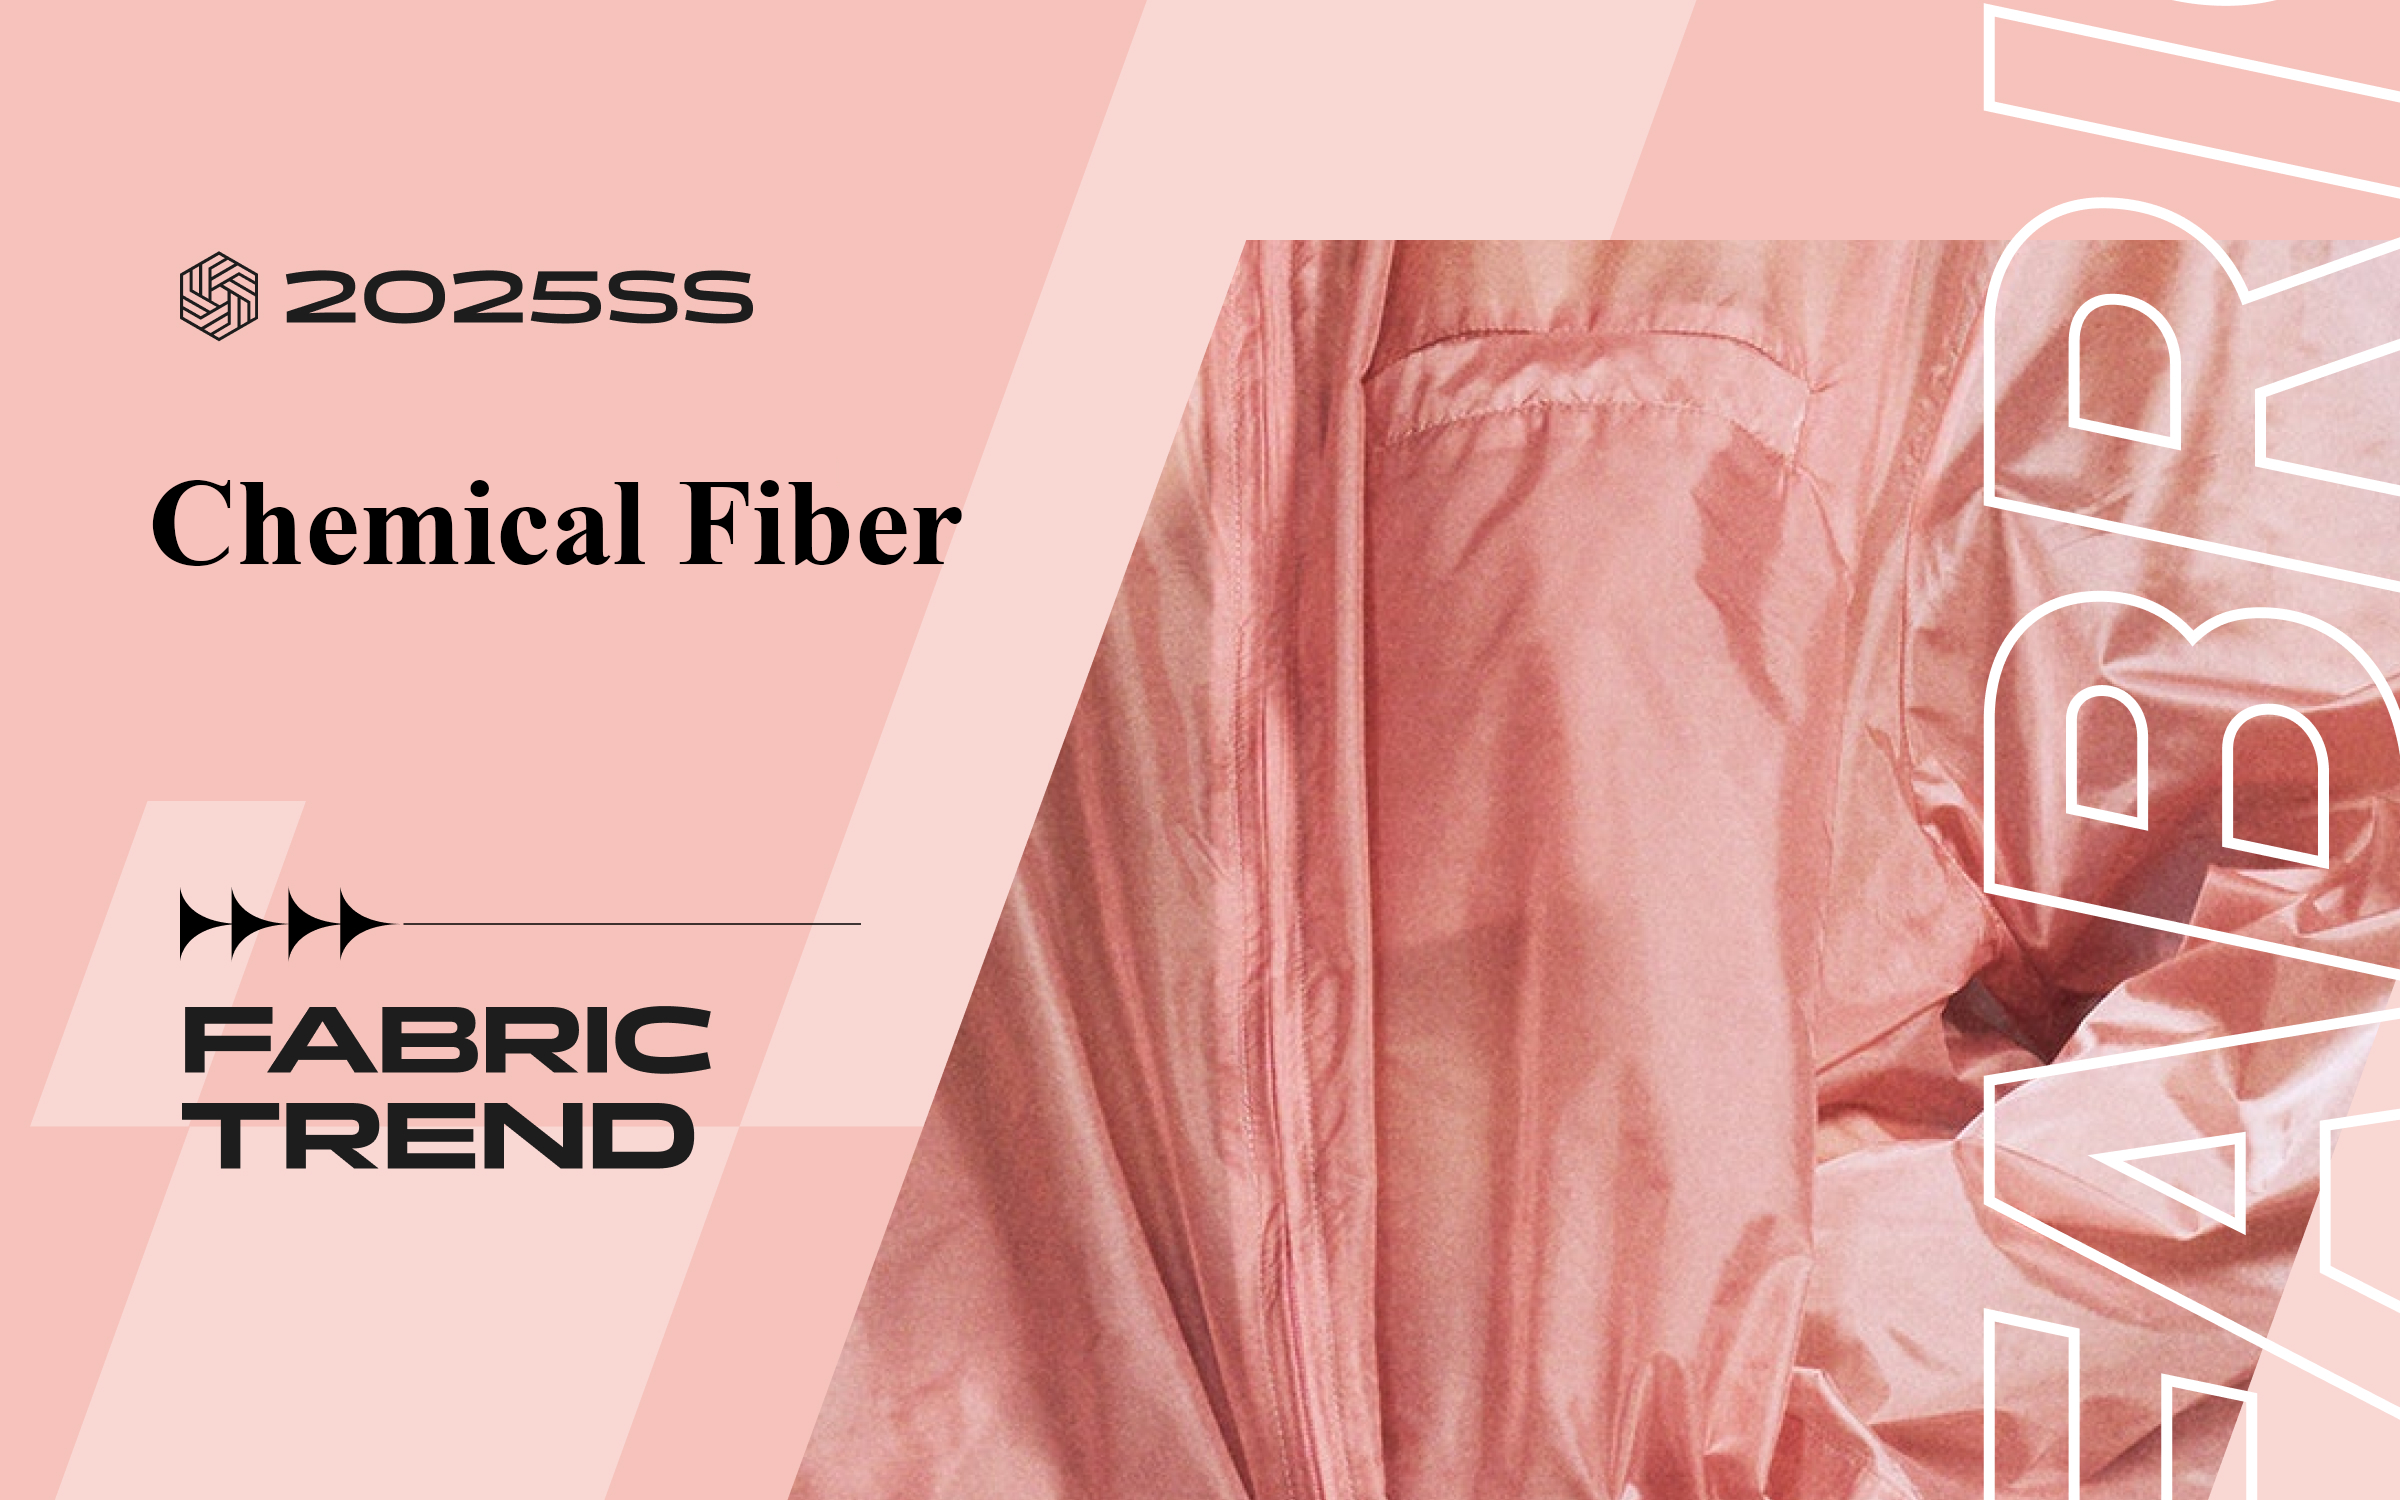 The Fabric Trend for Women's Chemical Fiber